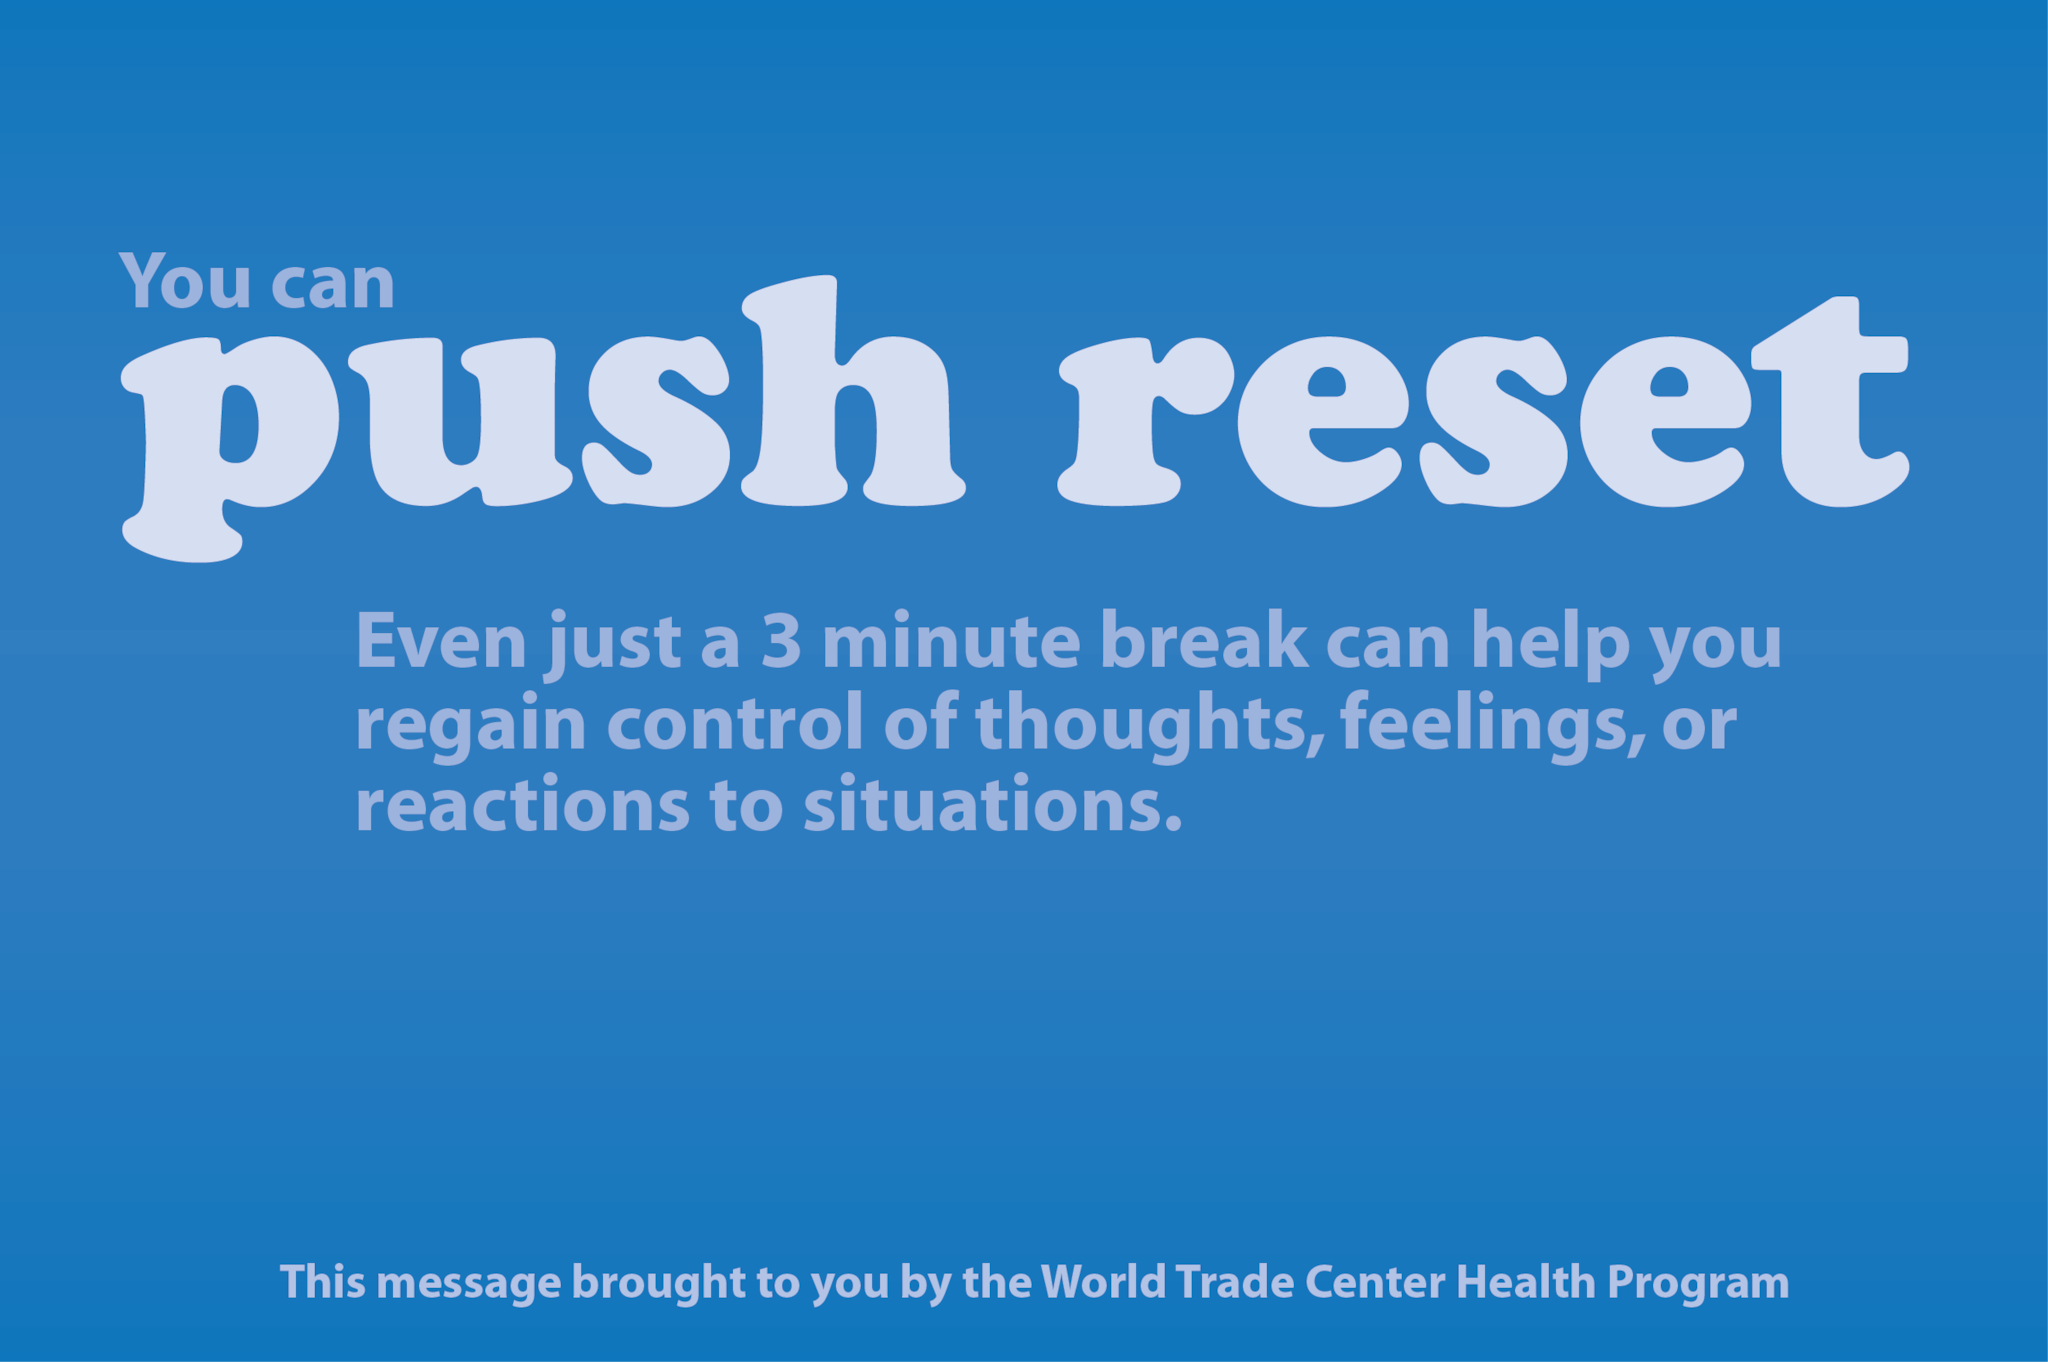 Push Reset - Even a 3 minute break can help you regain control of your thoughts, feelings, or reactions to situations